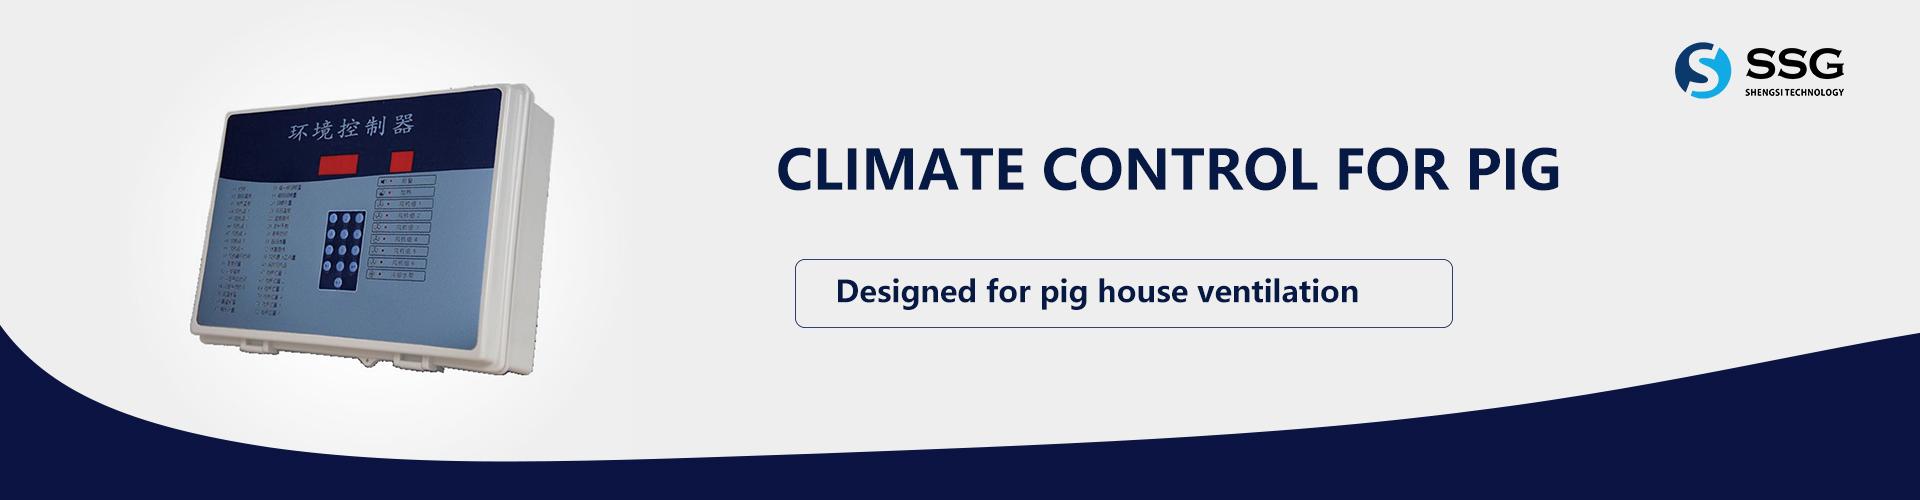 CLIMATE-CONTROL-FOR-PIG-banner